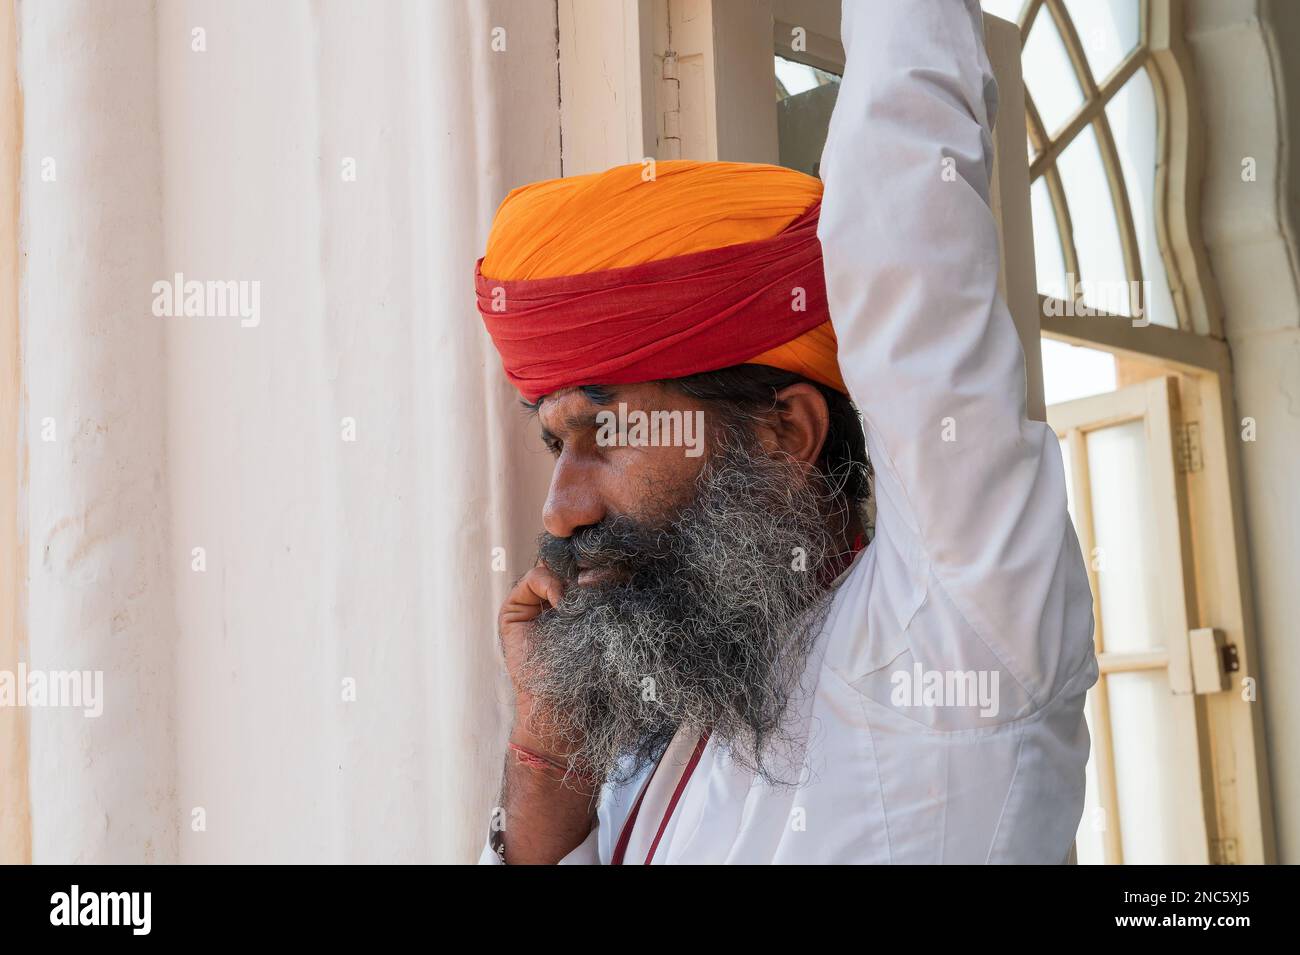 Jodhpur,Rajasthan,India - 19th October 2019: Rajput senior man with colorful turban called pagri, speaking on his new technology mobile phone. Stock Photo